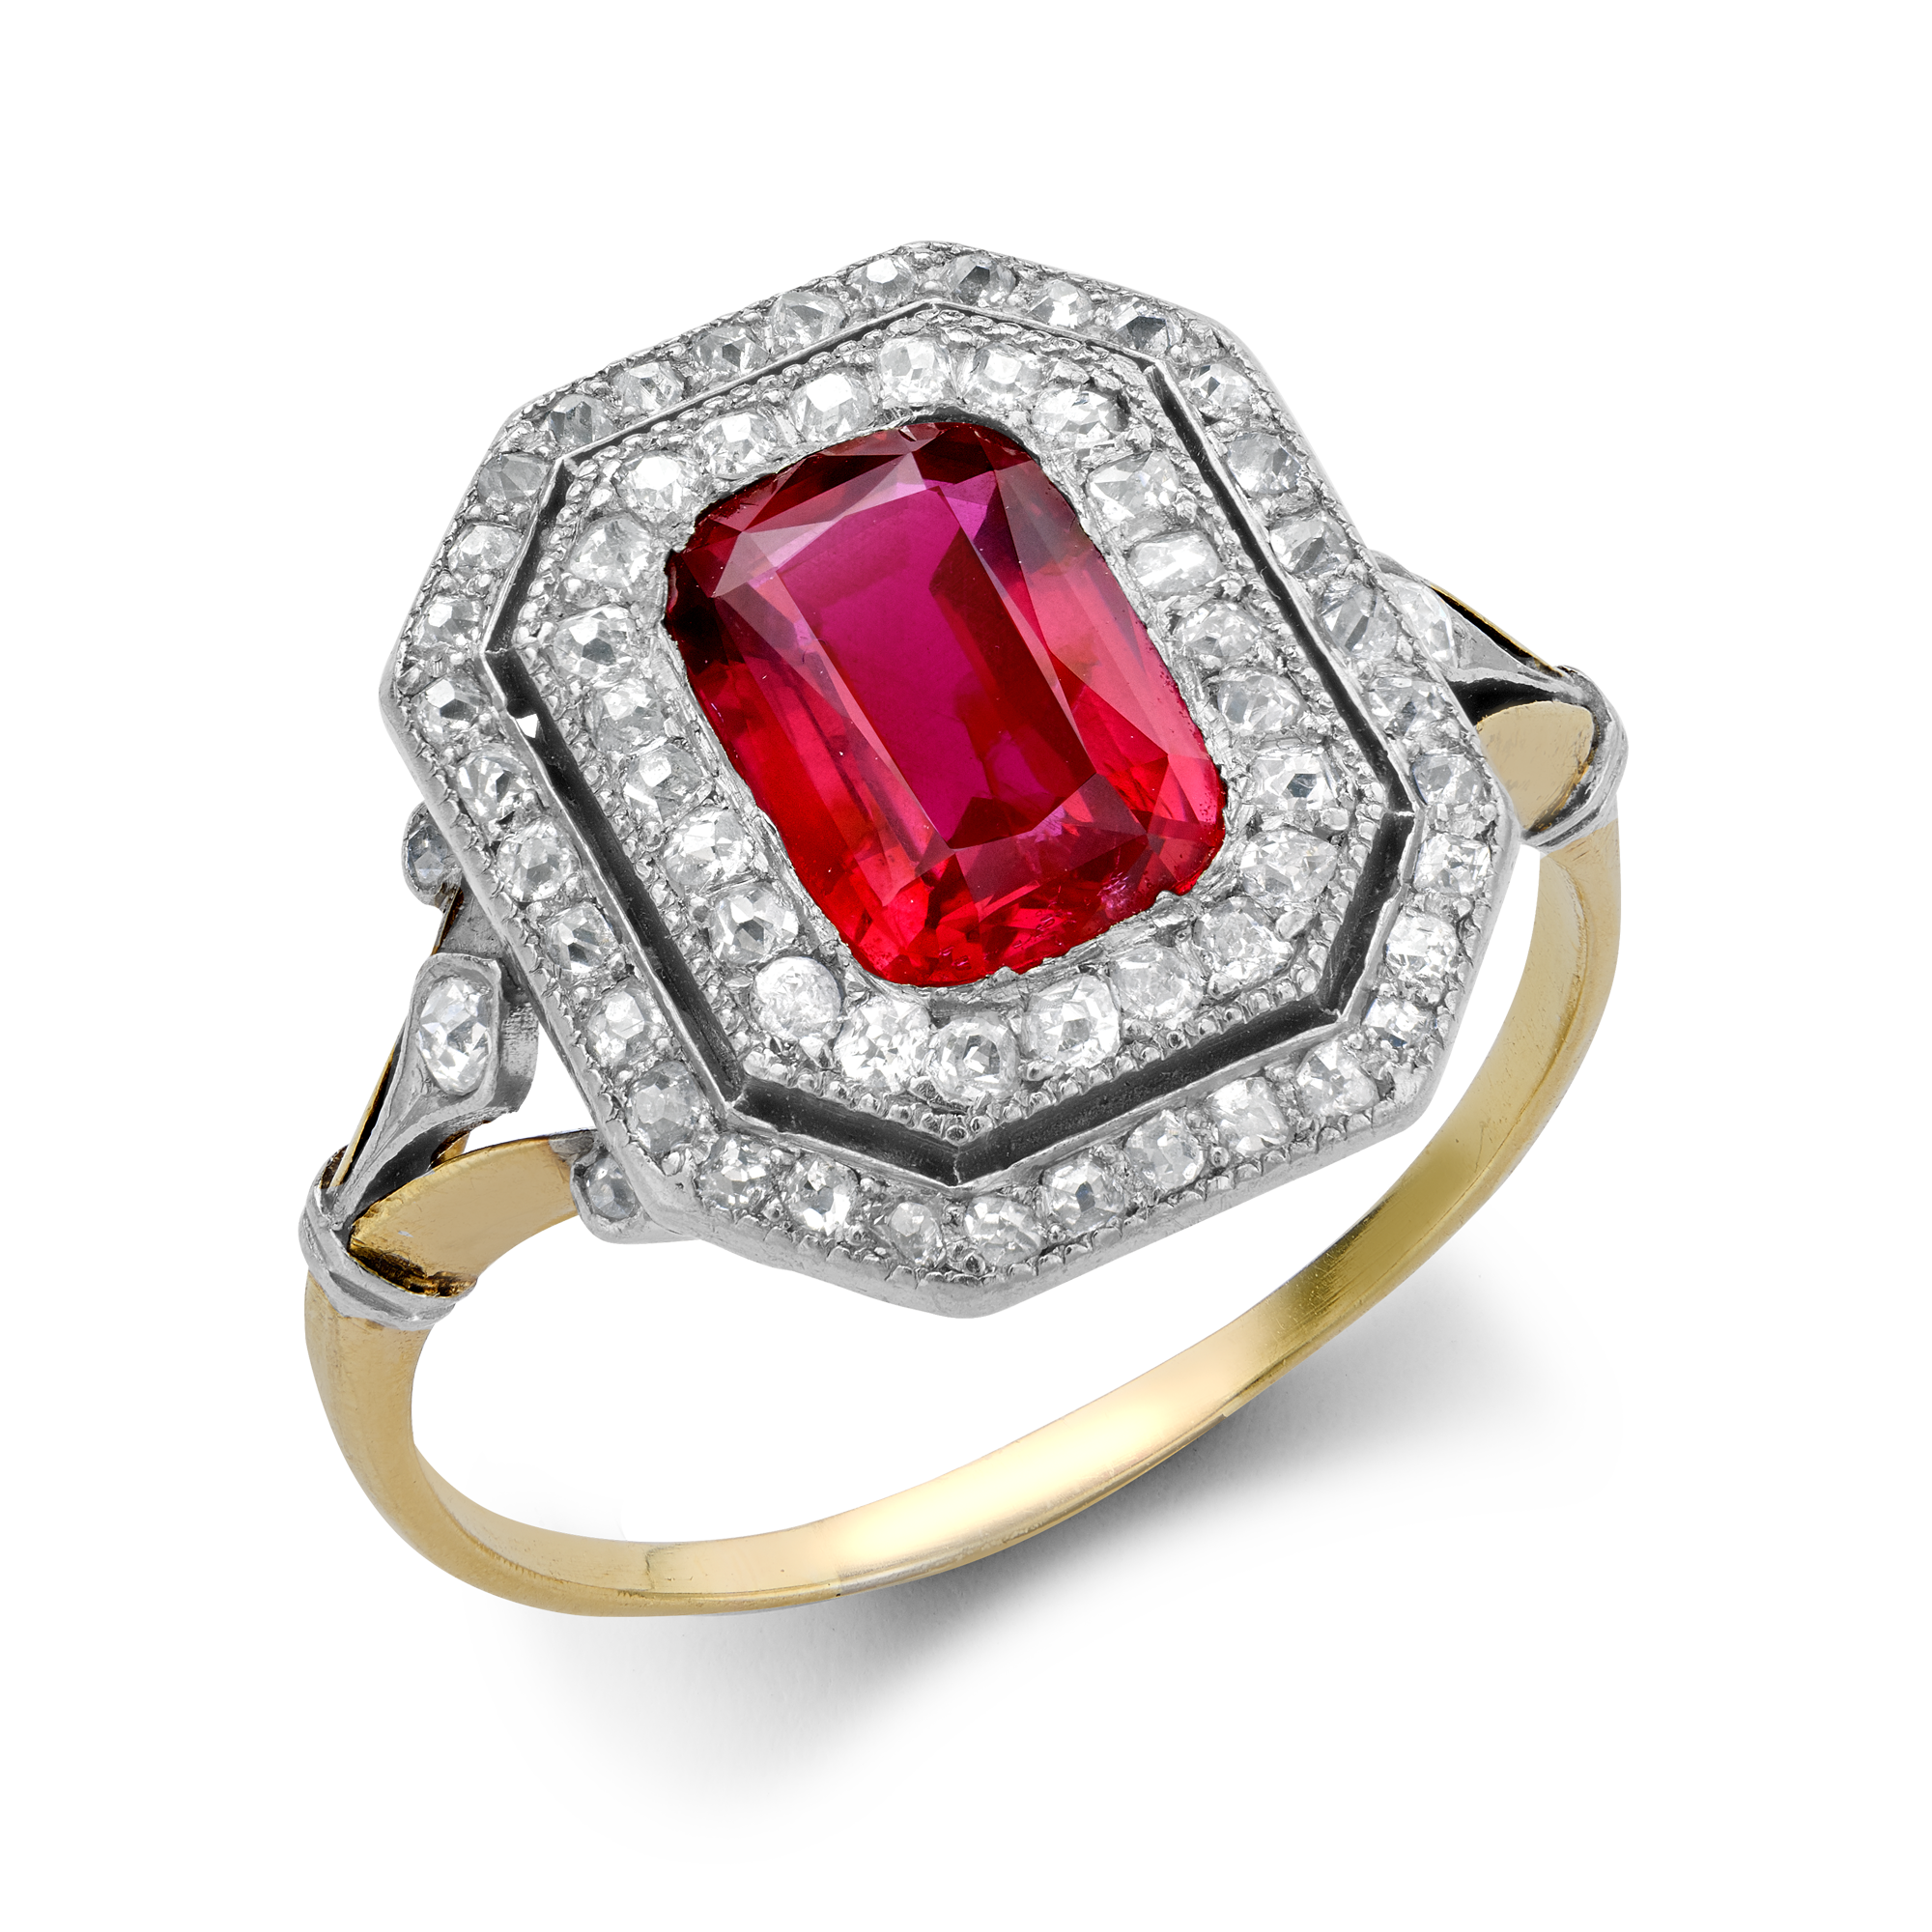 Edwardian Ruby Cluster Ring with a Two Row Diamond Surround Cushion Antique Cut, Millegrain Set_1